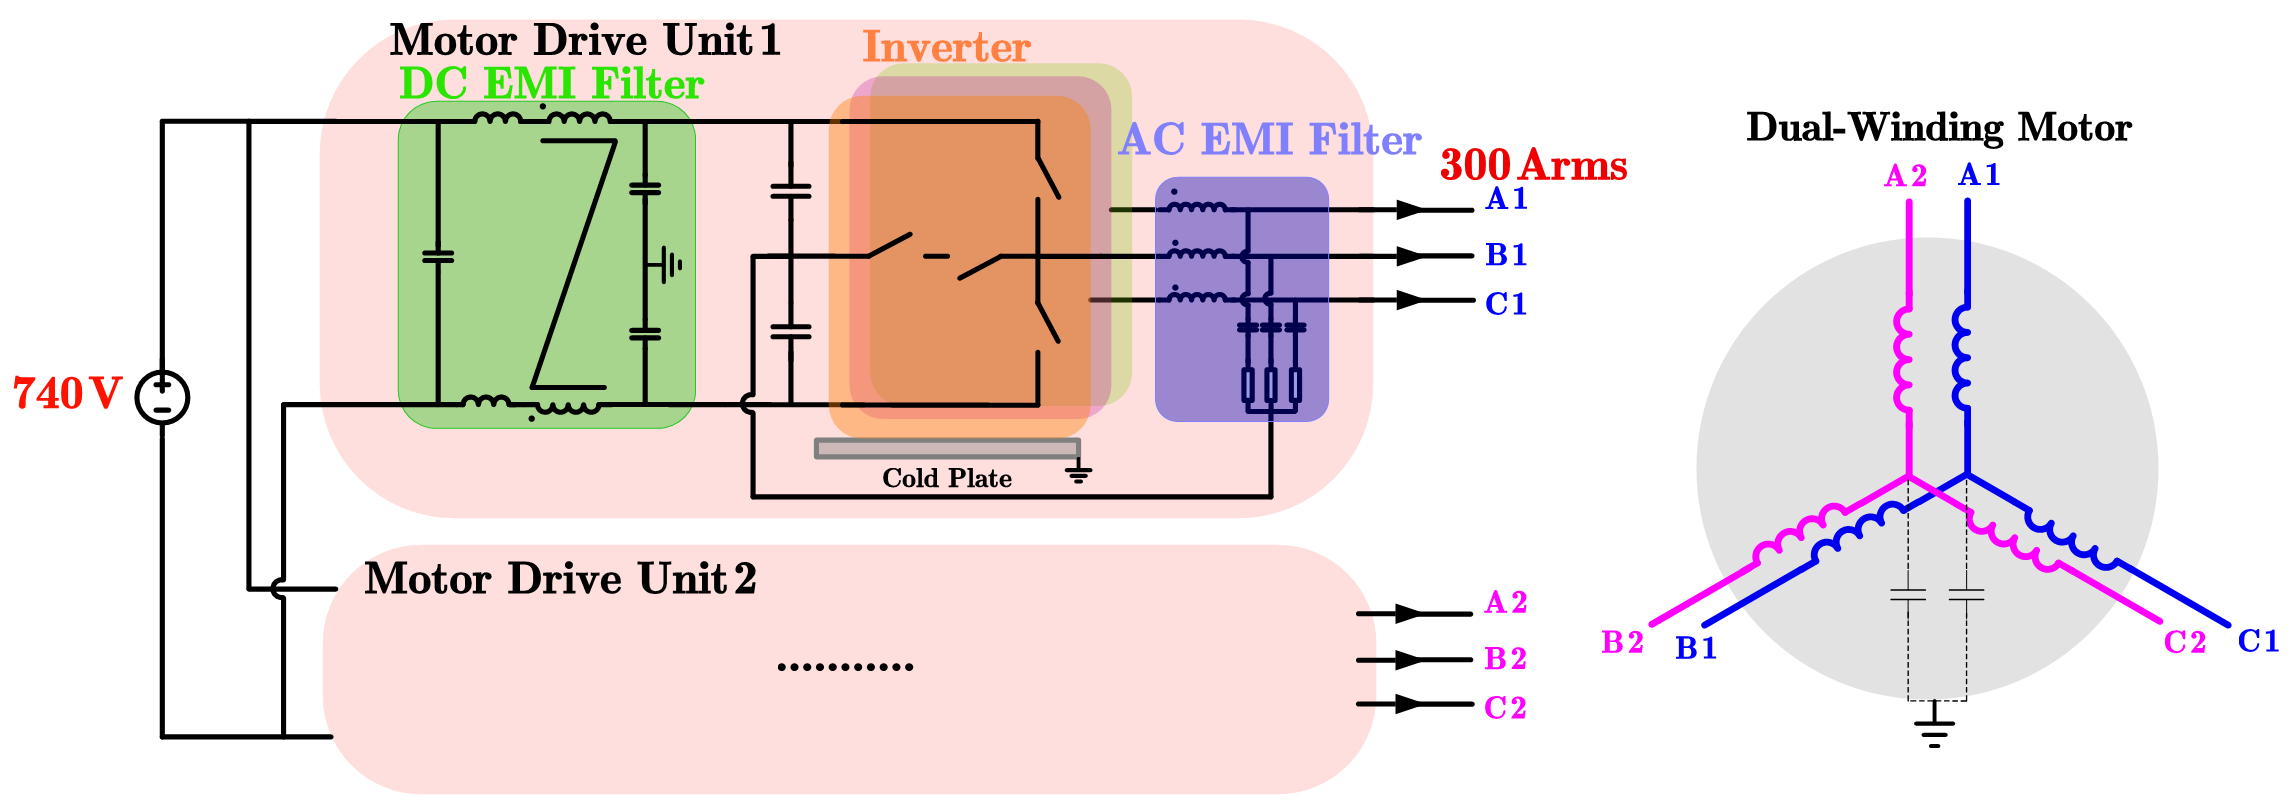 High-speed high-altitude motor drive architecture